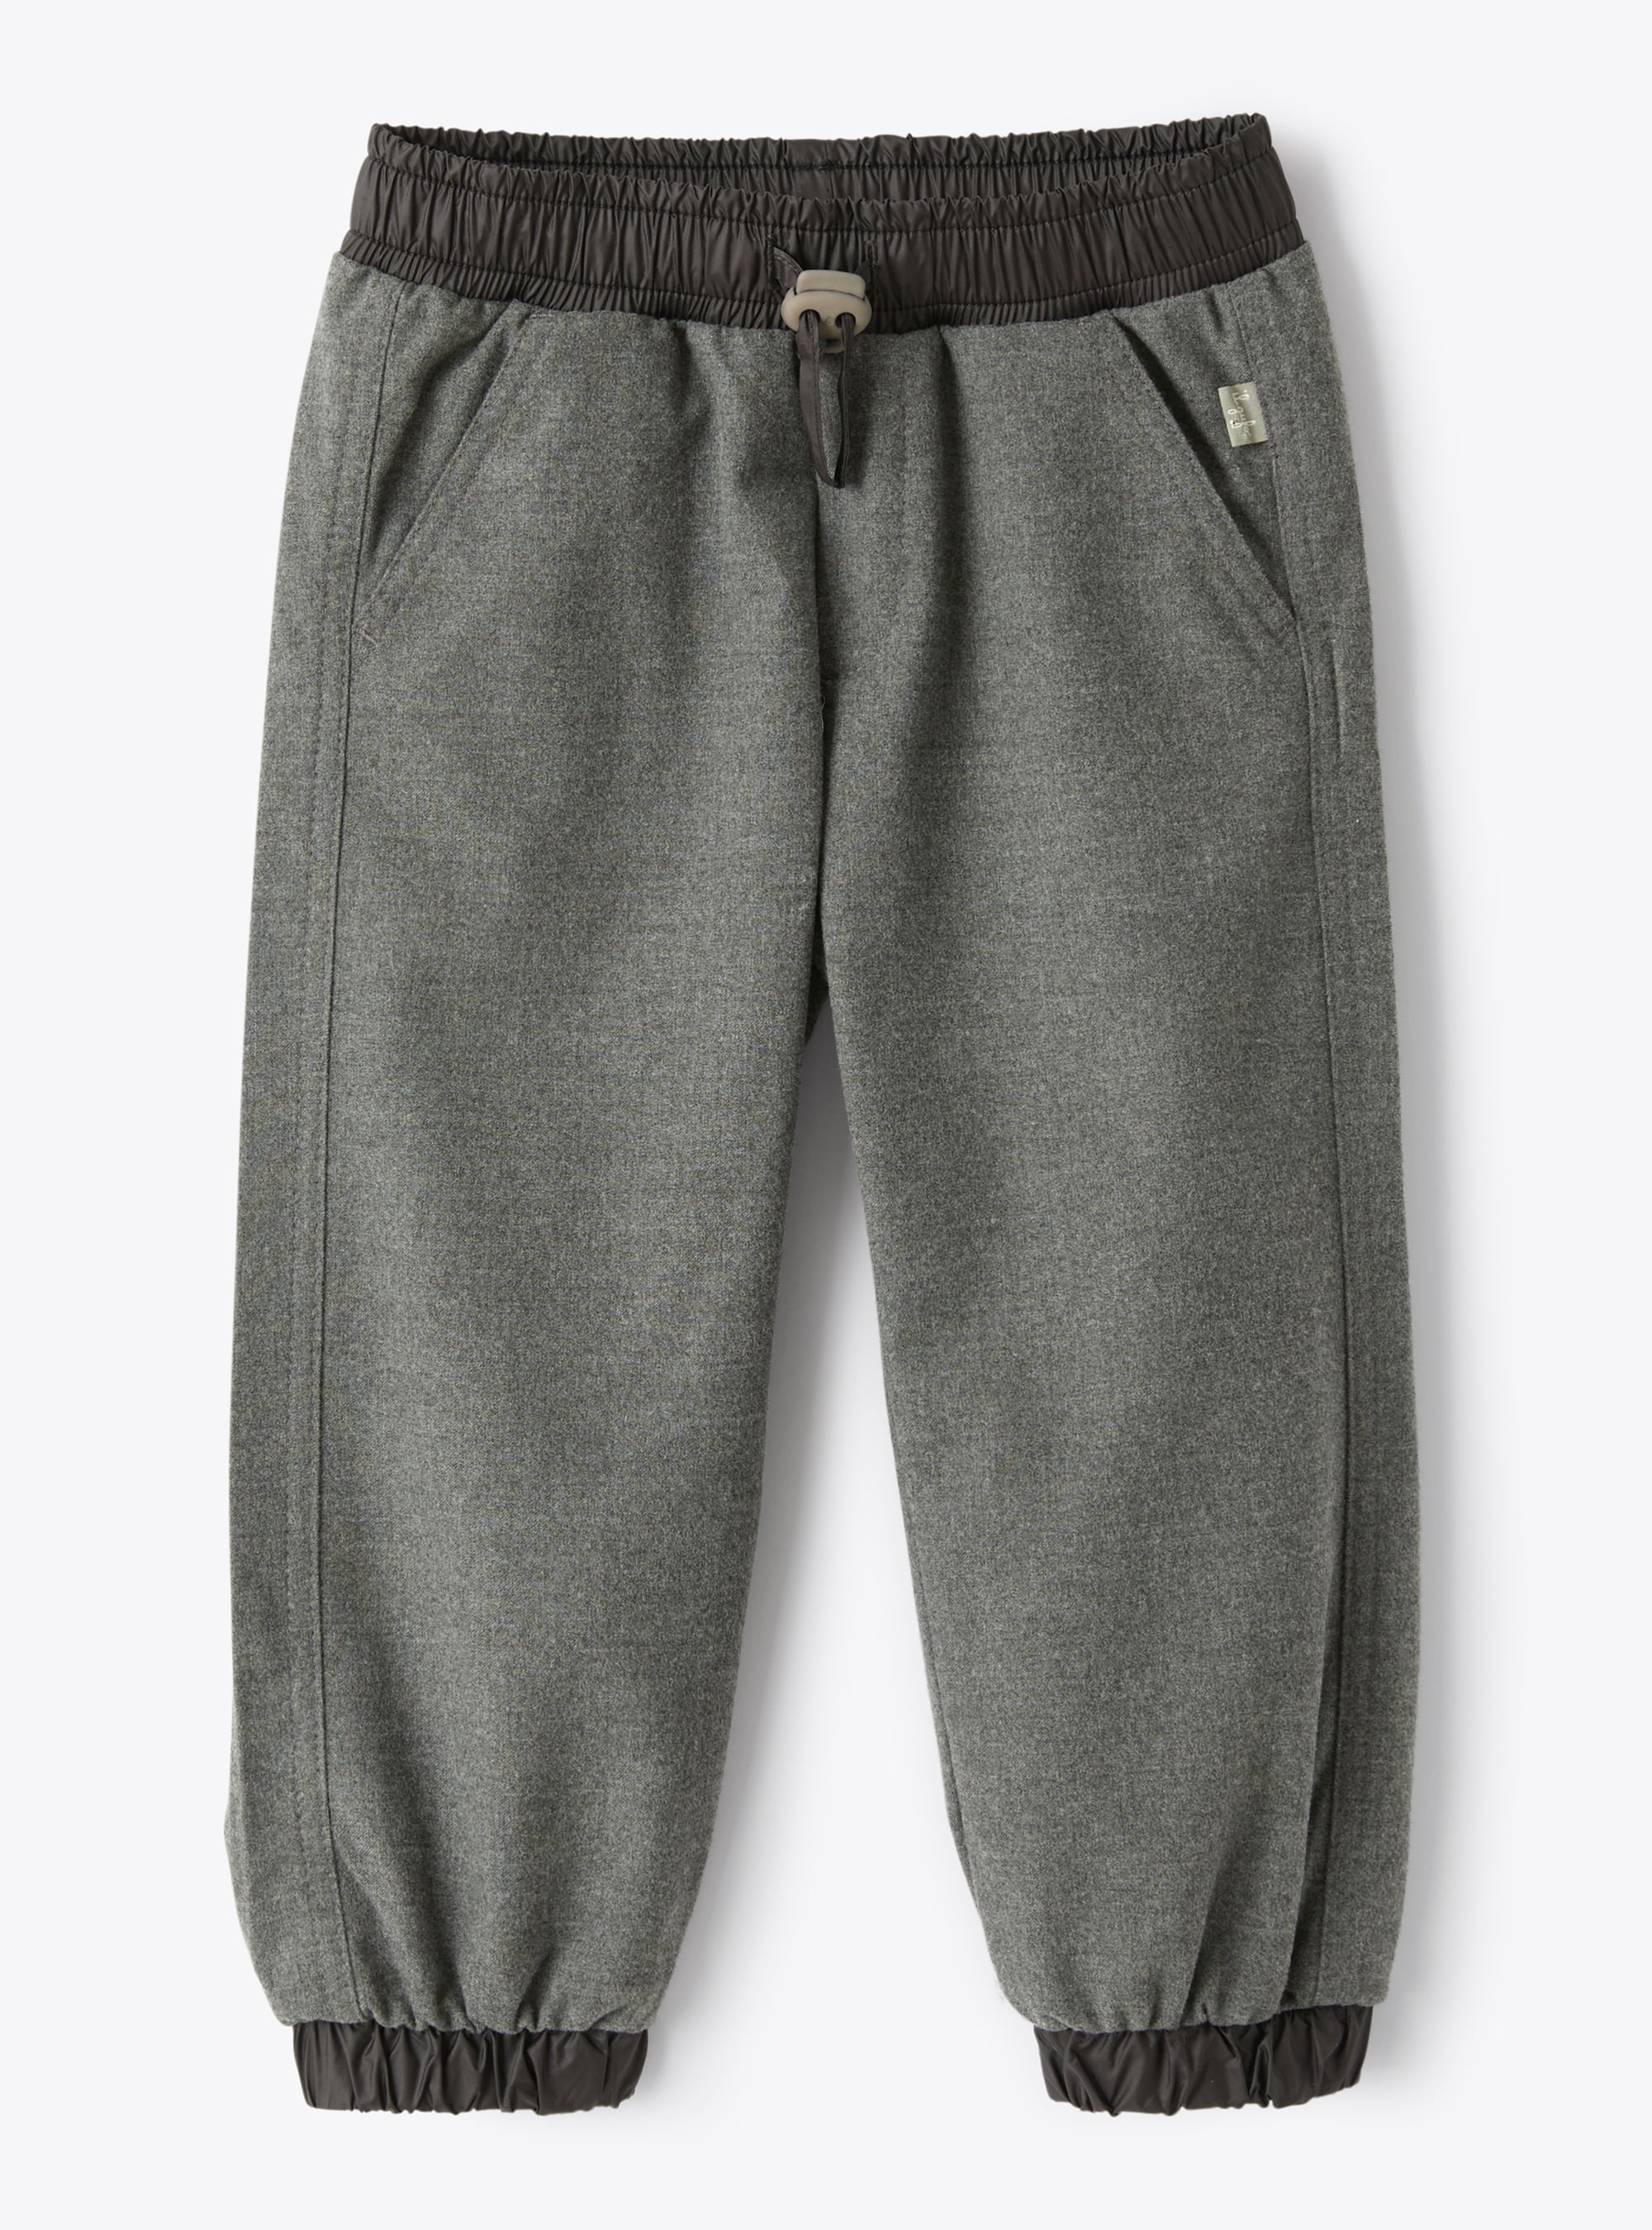 Technowool trousers with nylon details - Grey | Il Gufo